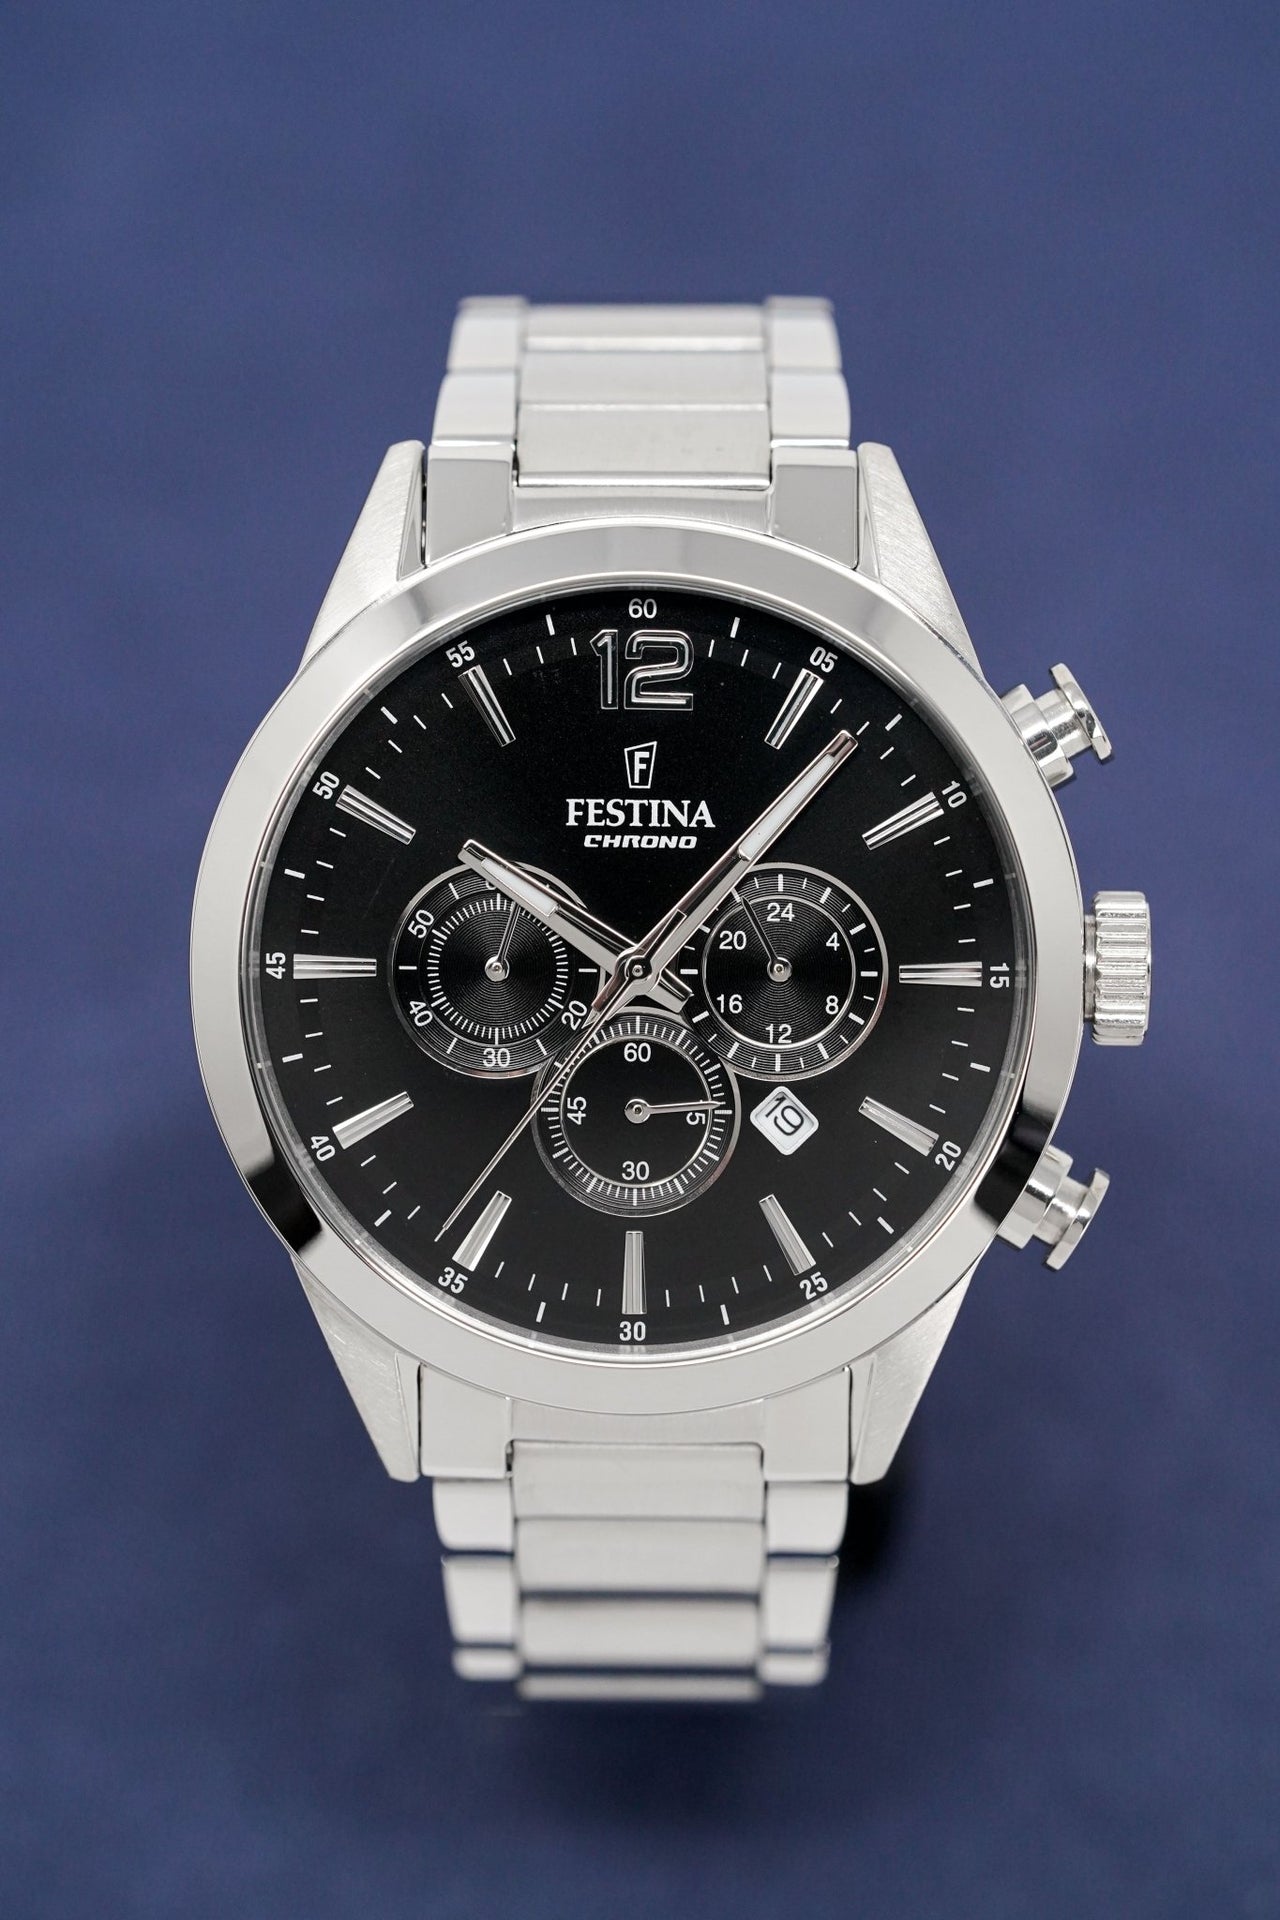 Stainless Timeless Watches – Black Chrono F20343-8 & Crystals Watch Festina Steel